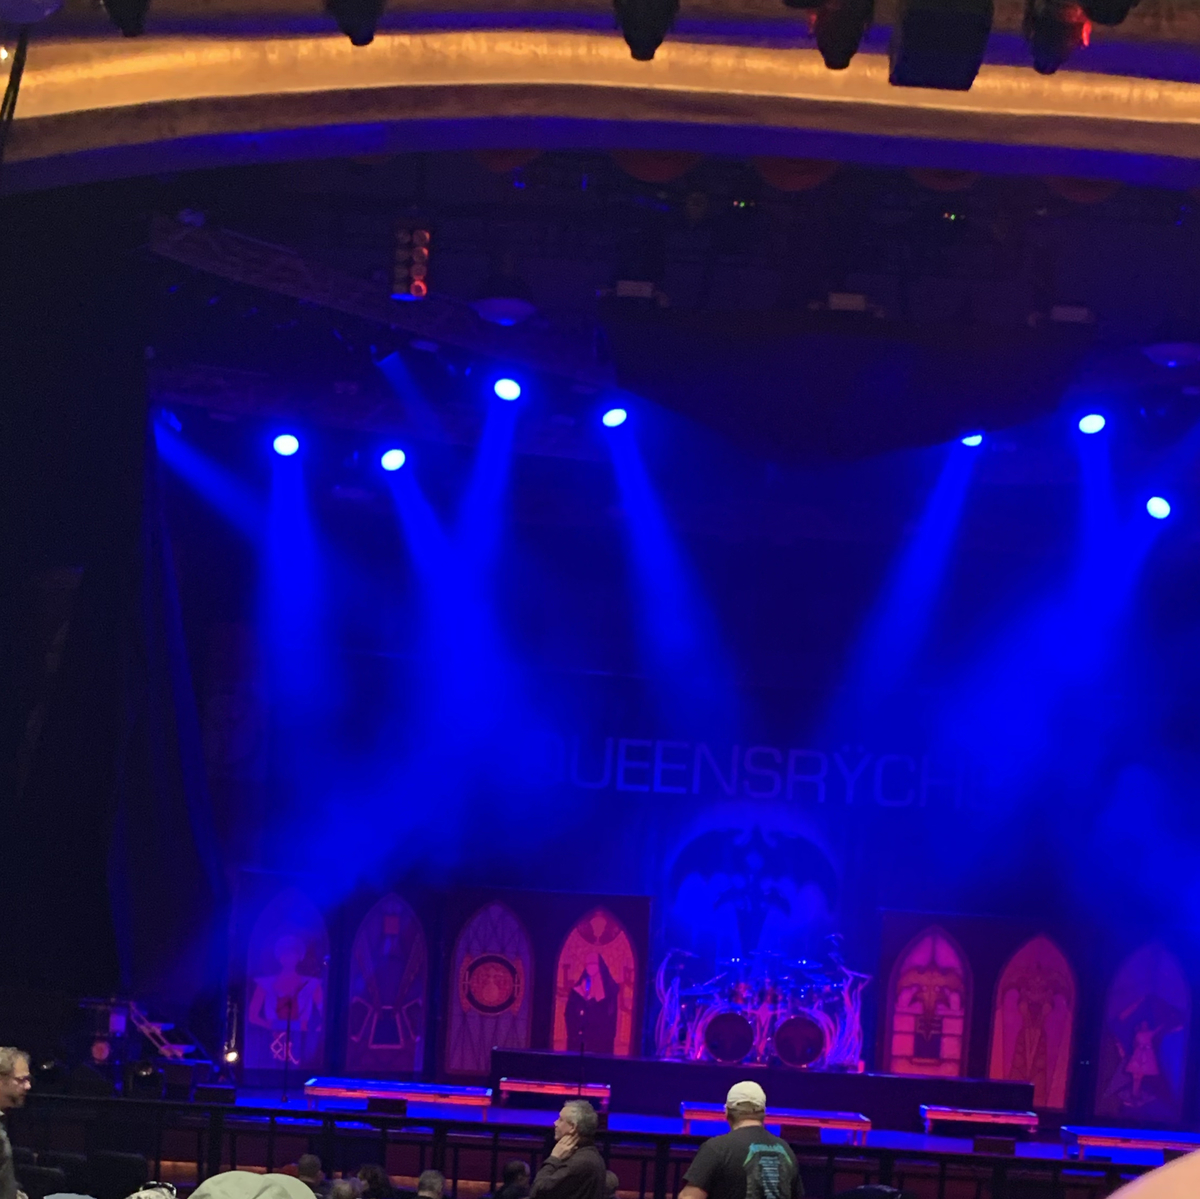 Concert History of The Grand Theater at Foxwoods Resort Casino